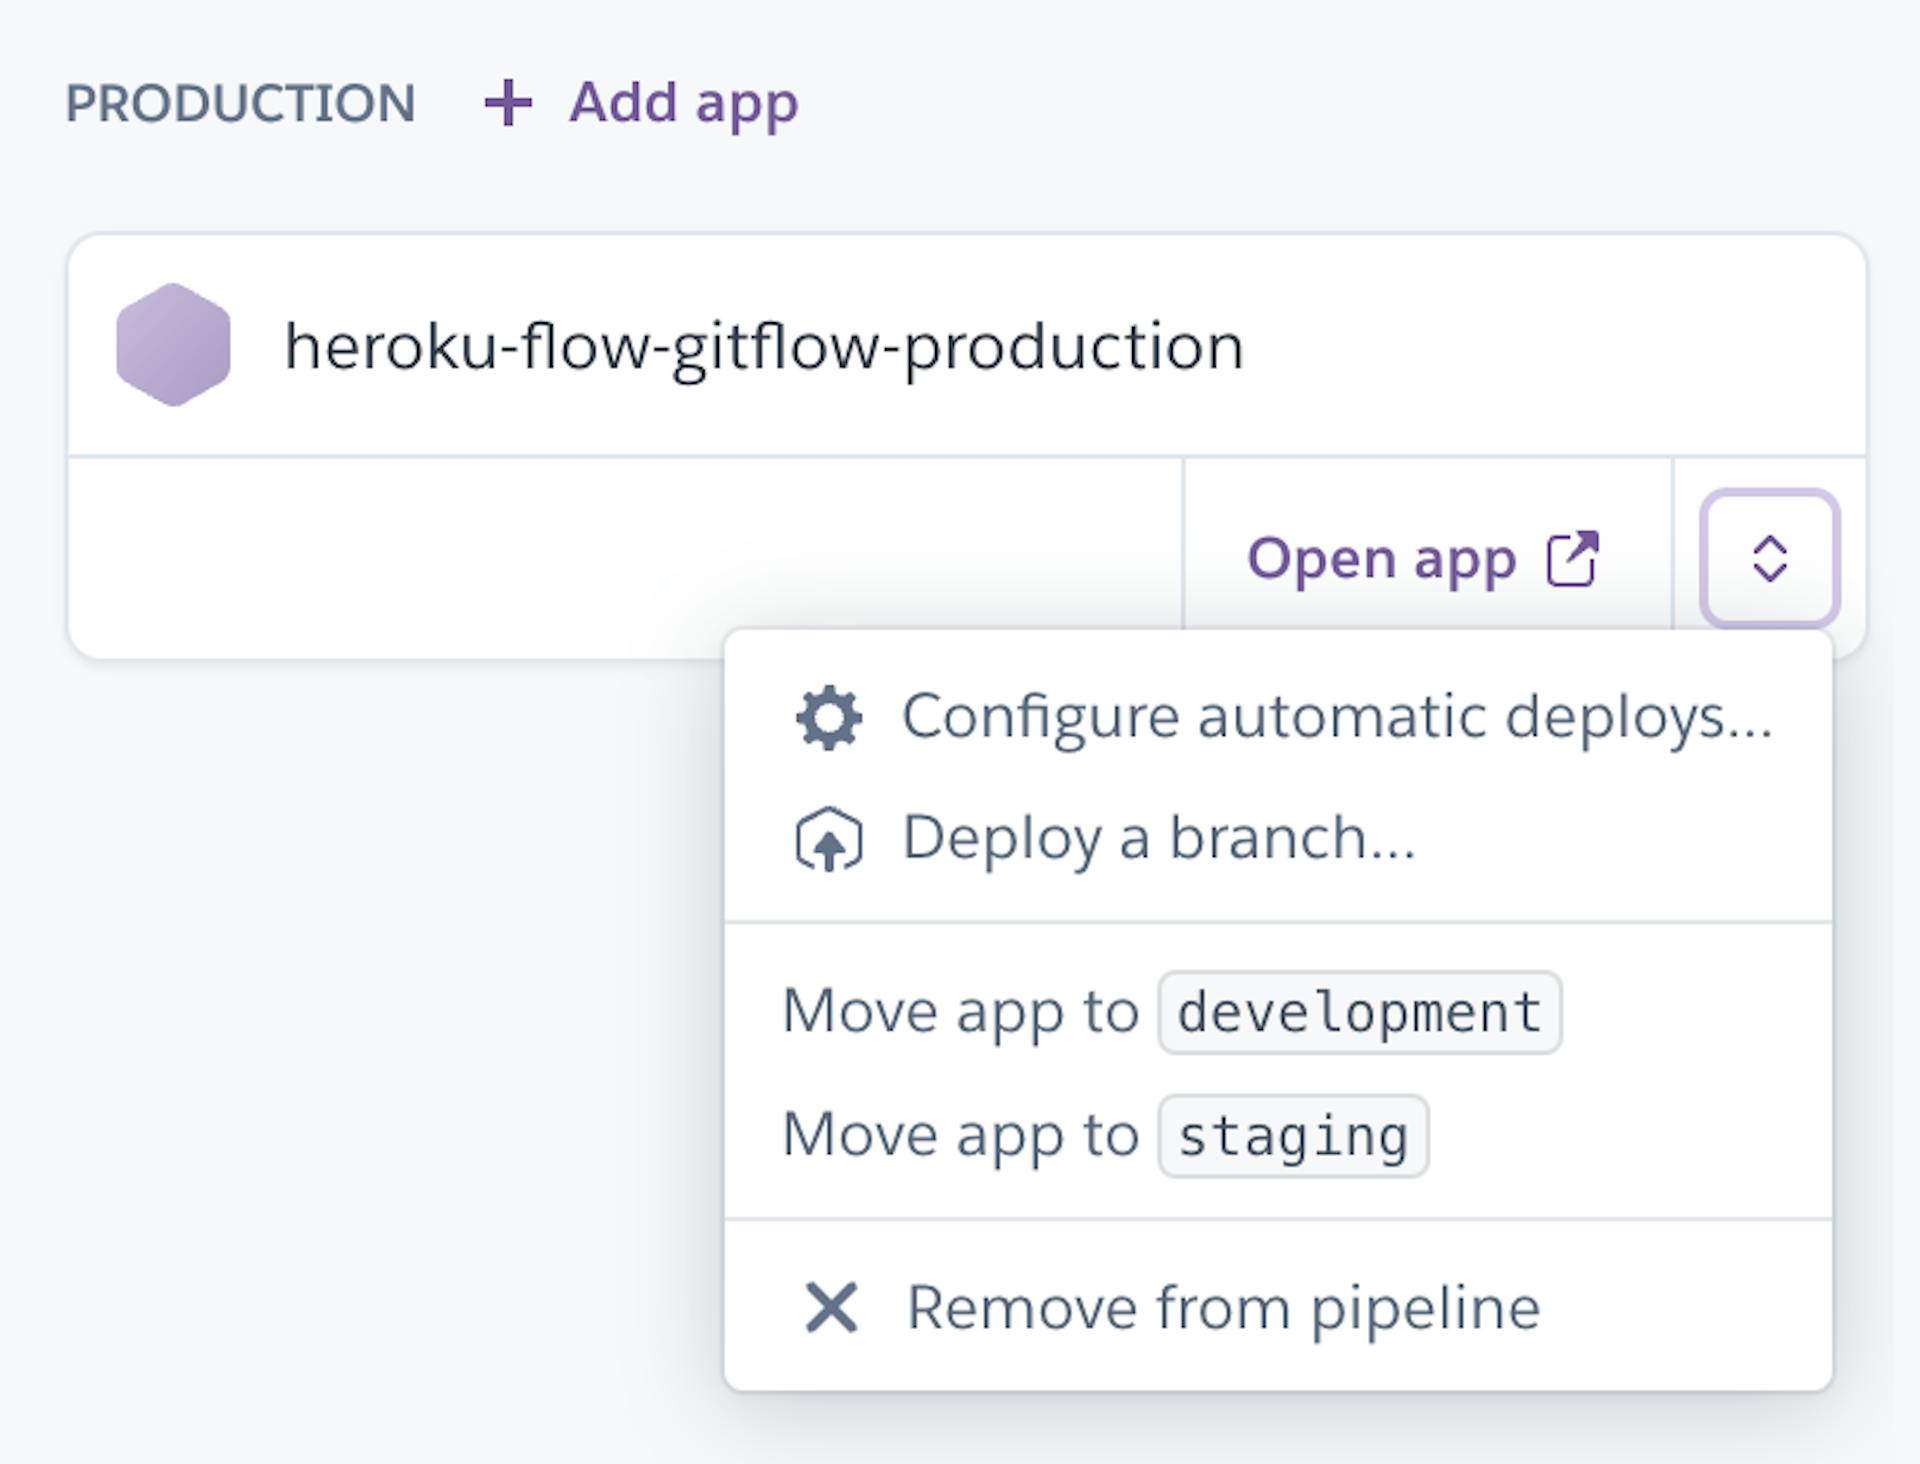 Configure automatic deploys for the production app